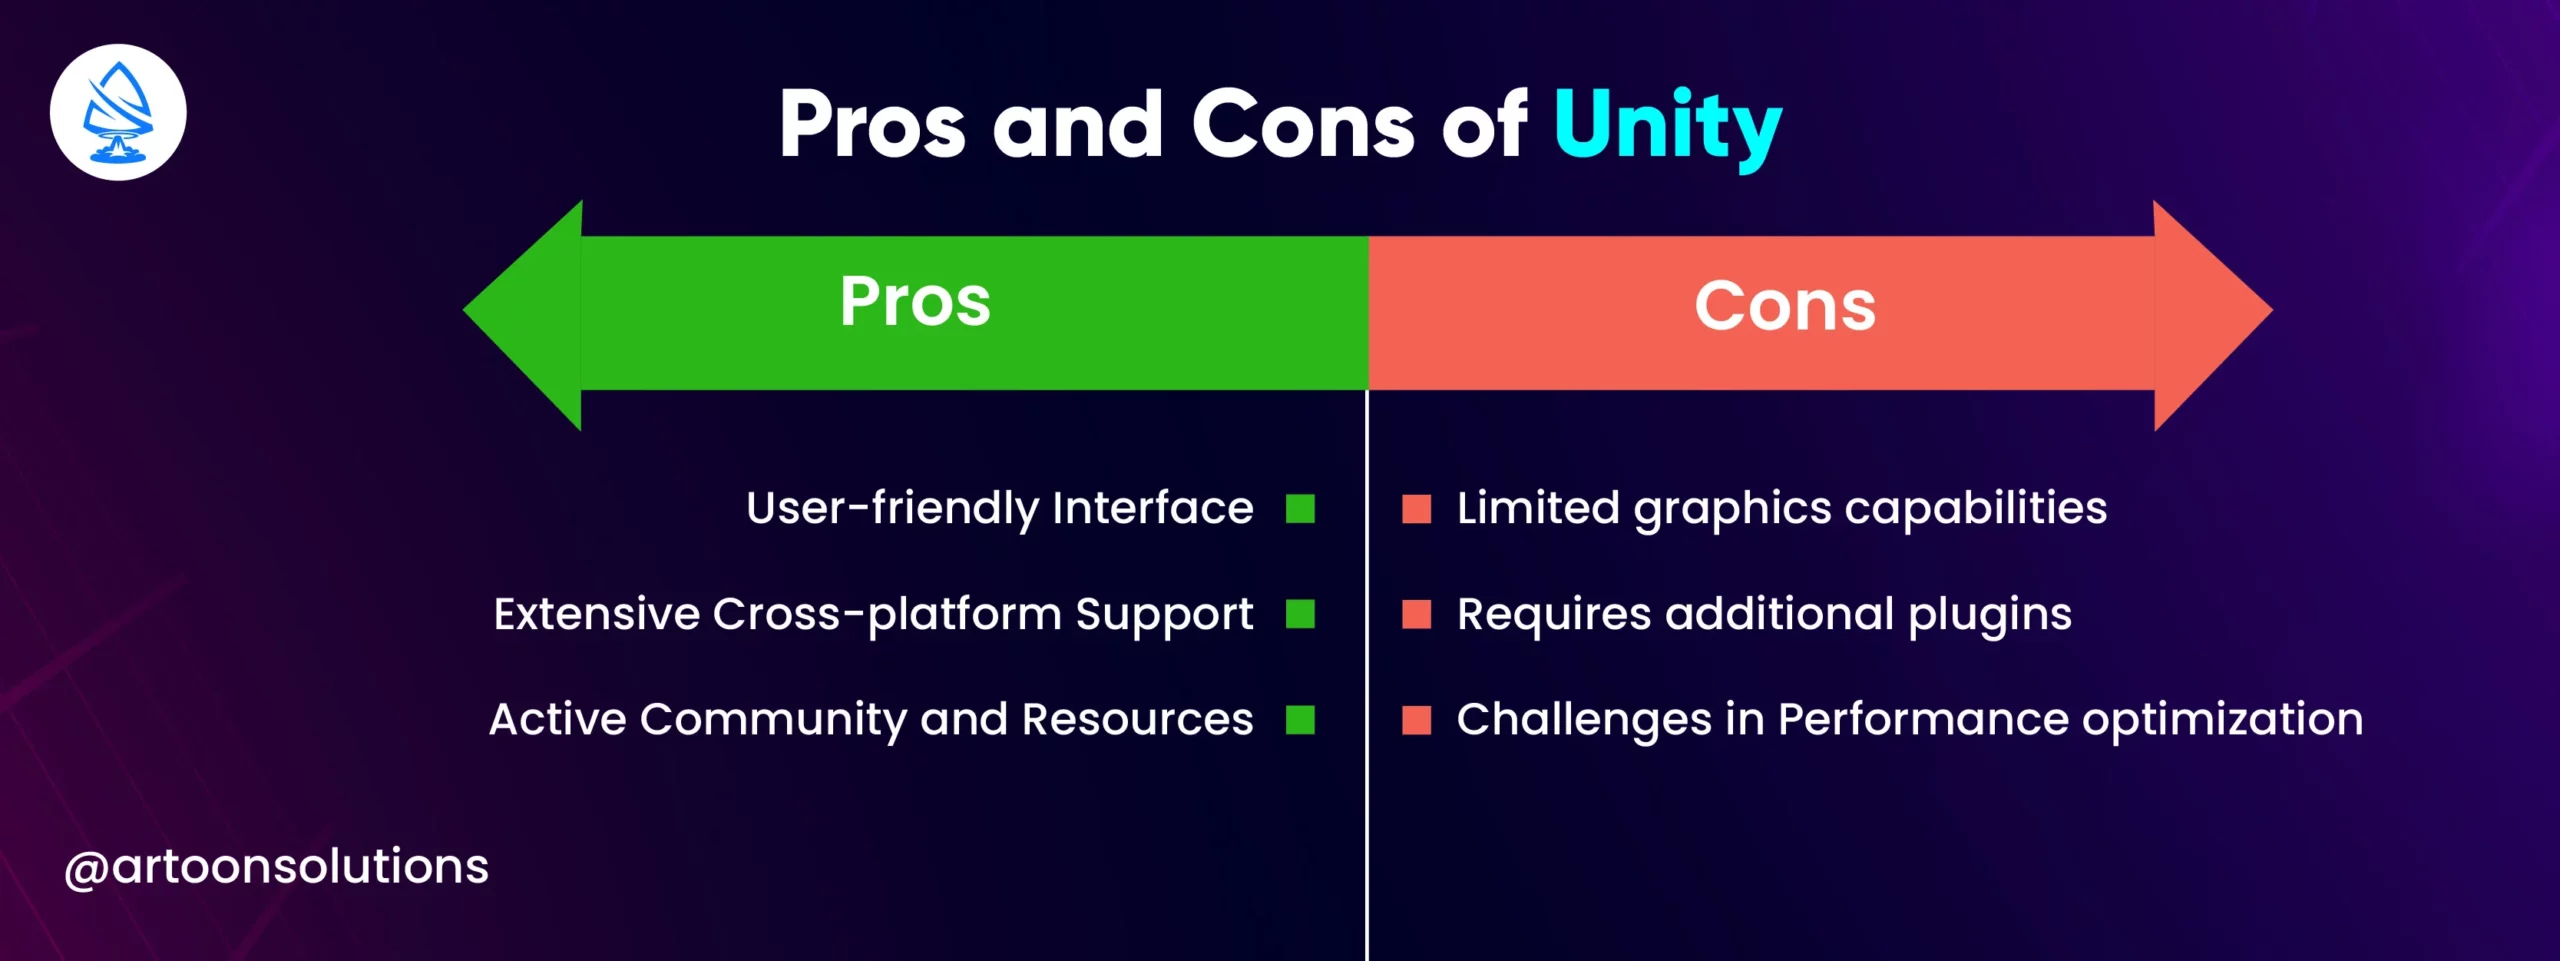 Pros and Cons of Unity